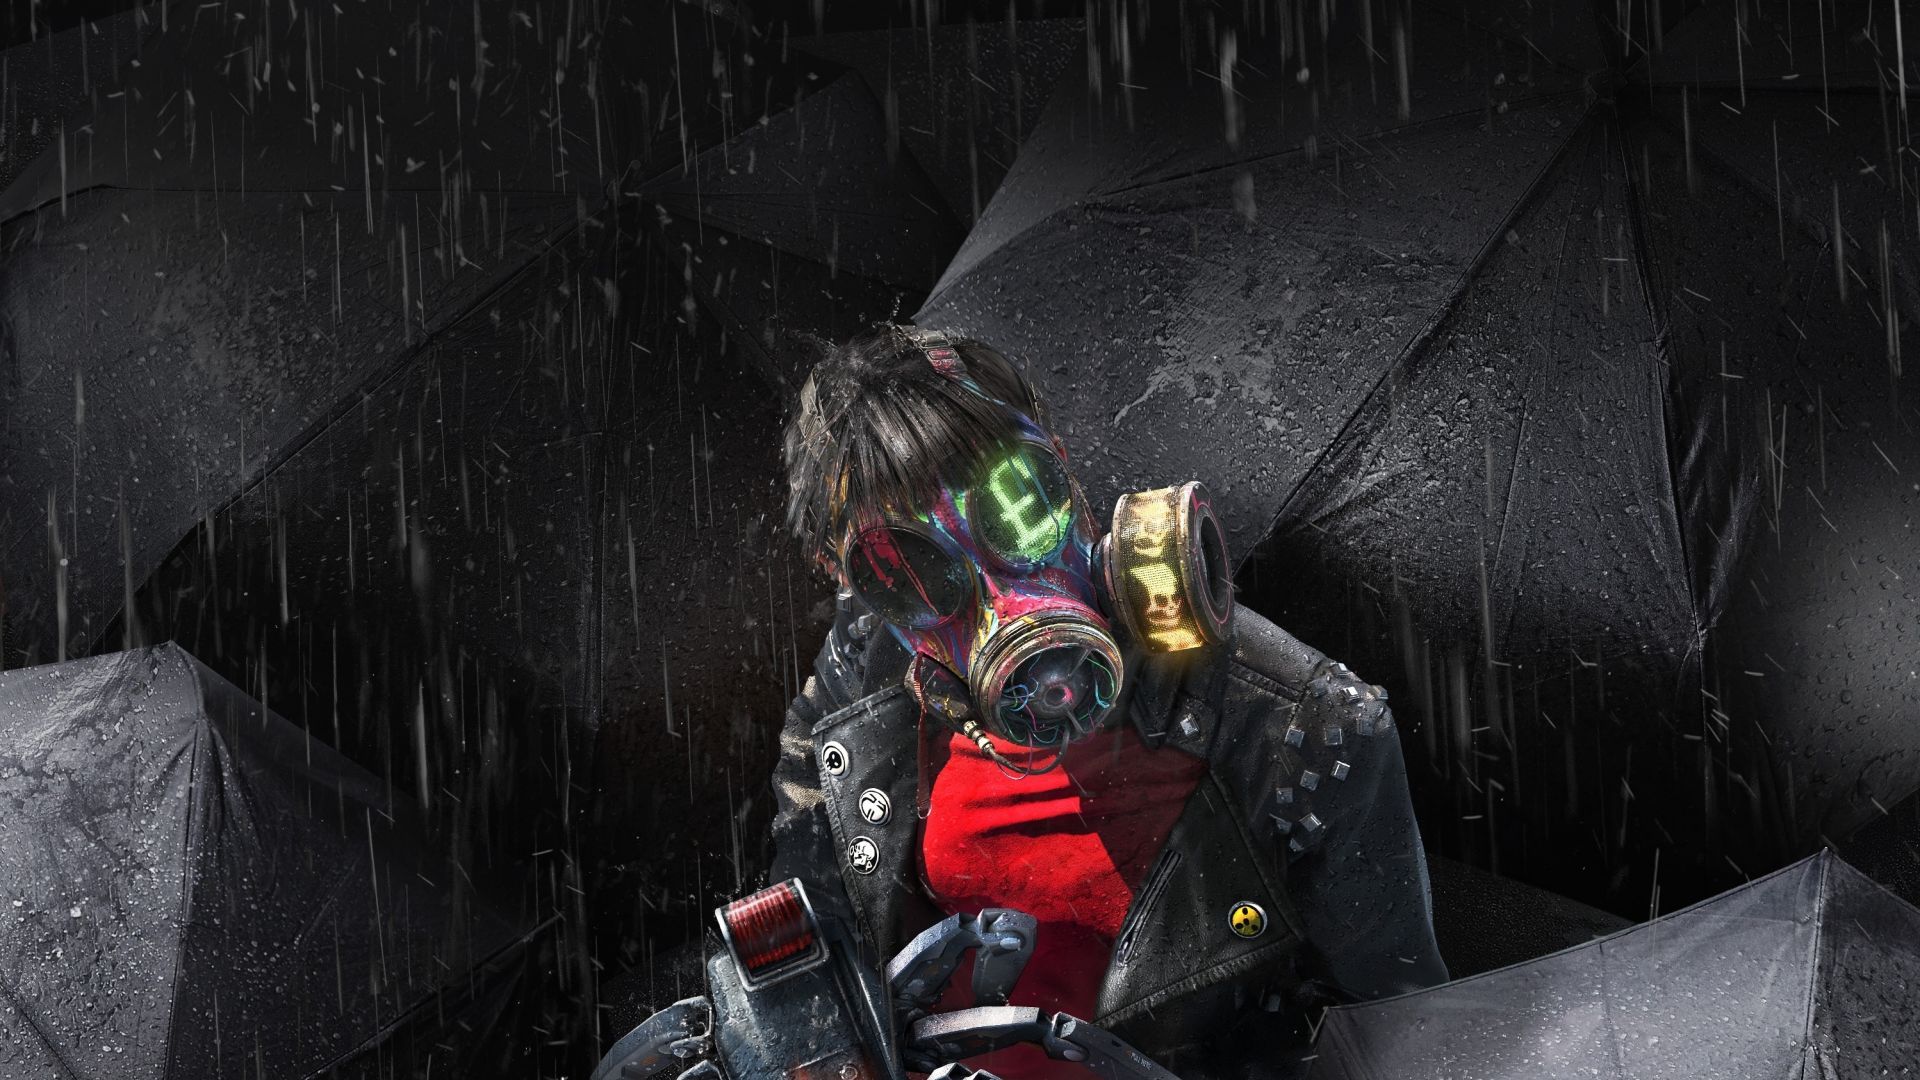 Desktop wallpaper watch dogs: legion, colorful mask, video game, xbox one, playstation HD image, picture, background, d42b59